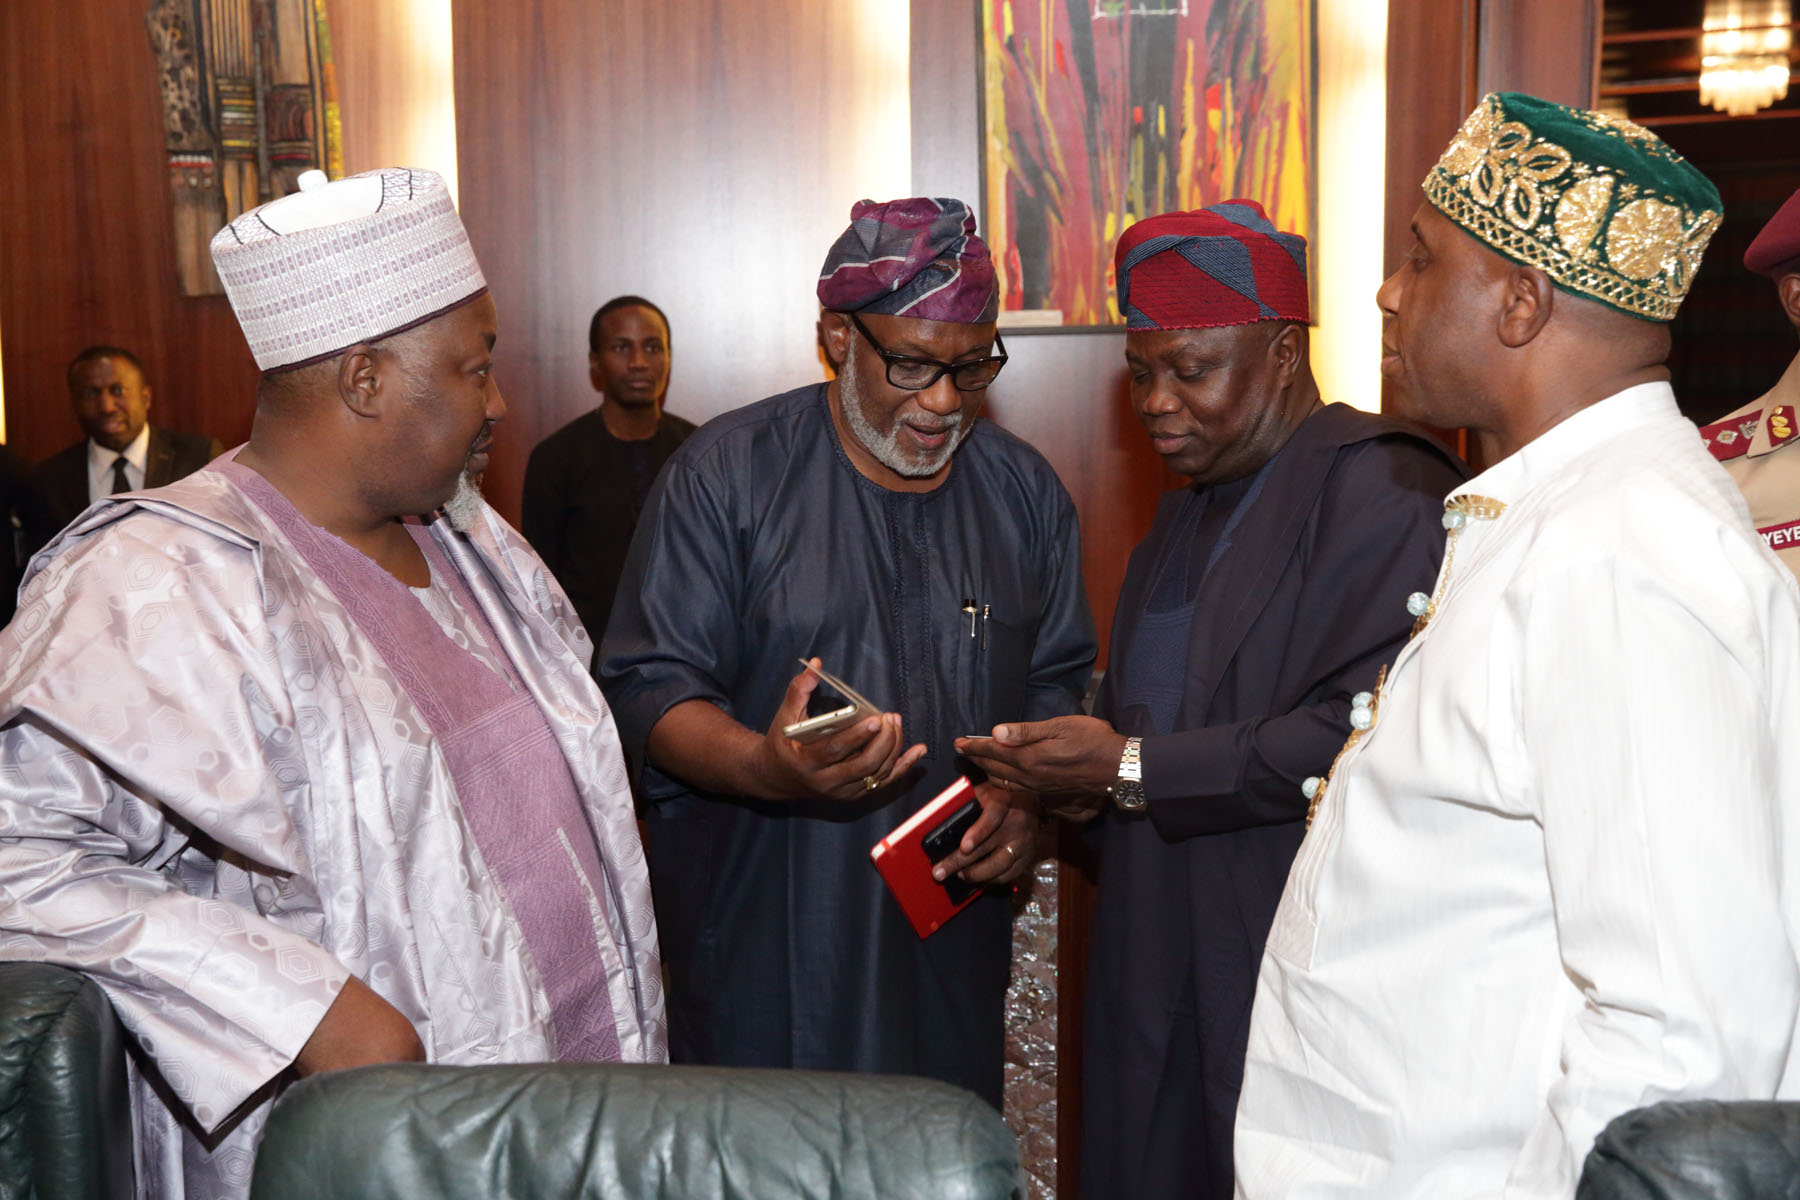 Lagos State Governor, Mr. Akinwunmi Ambode (2nd right), with Minister of Transportation, Mr. Rotimi Amaechi (right); Ondo State Governor-elect, Mr. Rotimi Akeredolu (2nd left) and Jigawa State Governor, Alhaji Badaru Abubakar (left) during the National Economic Council meeting at the Council Chamber, State House, Abuja, on Thursday, February 16, 2017.